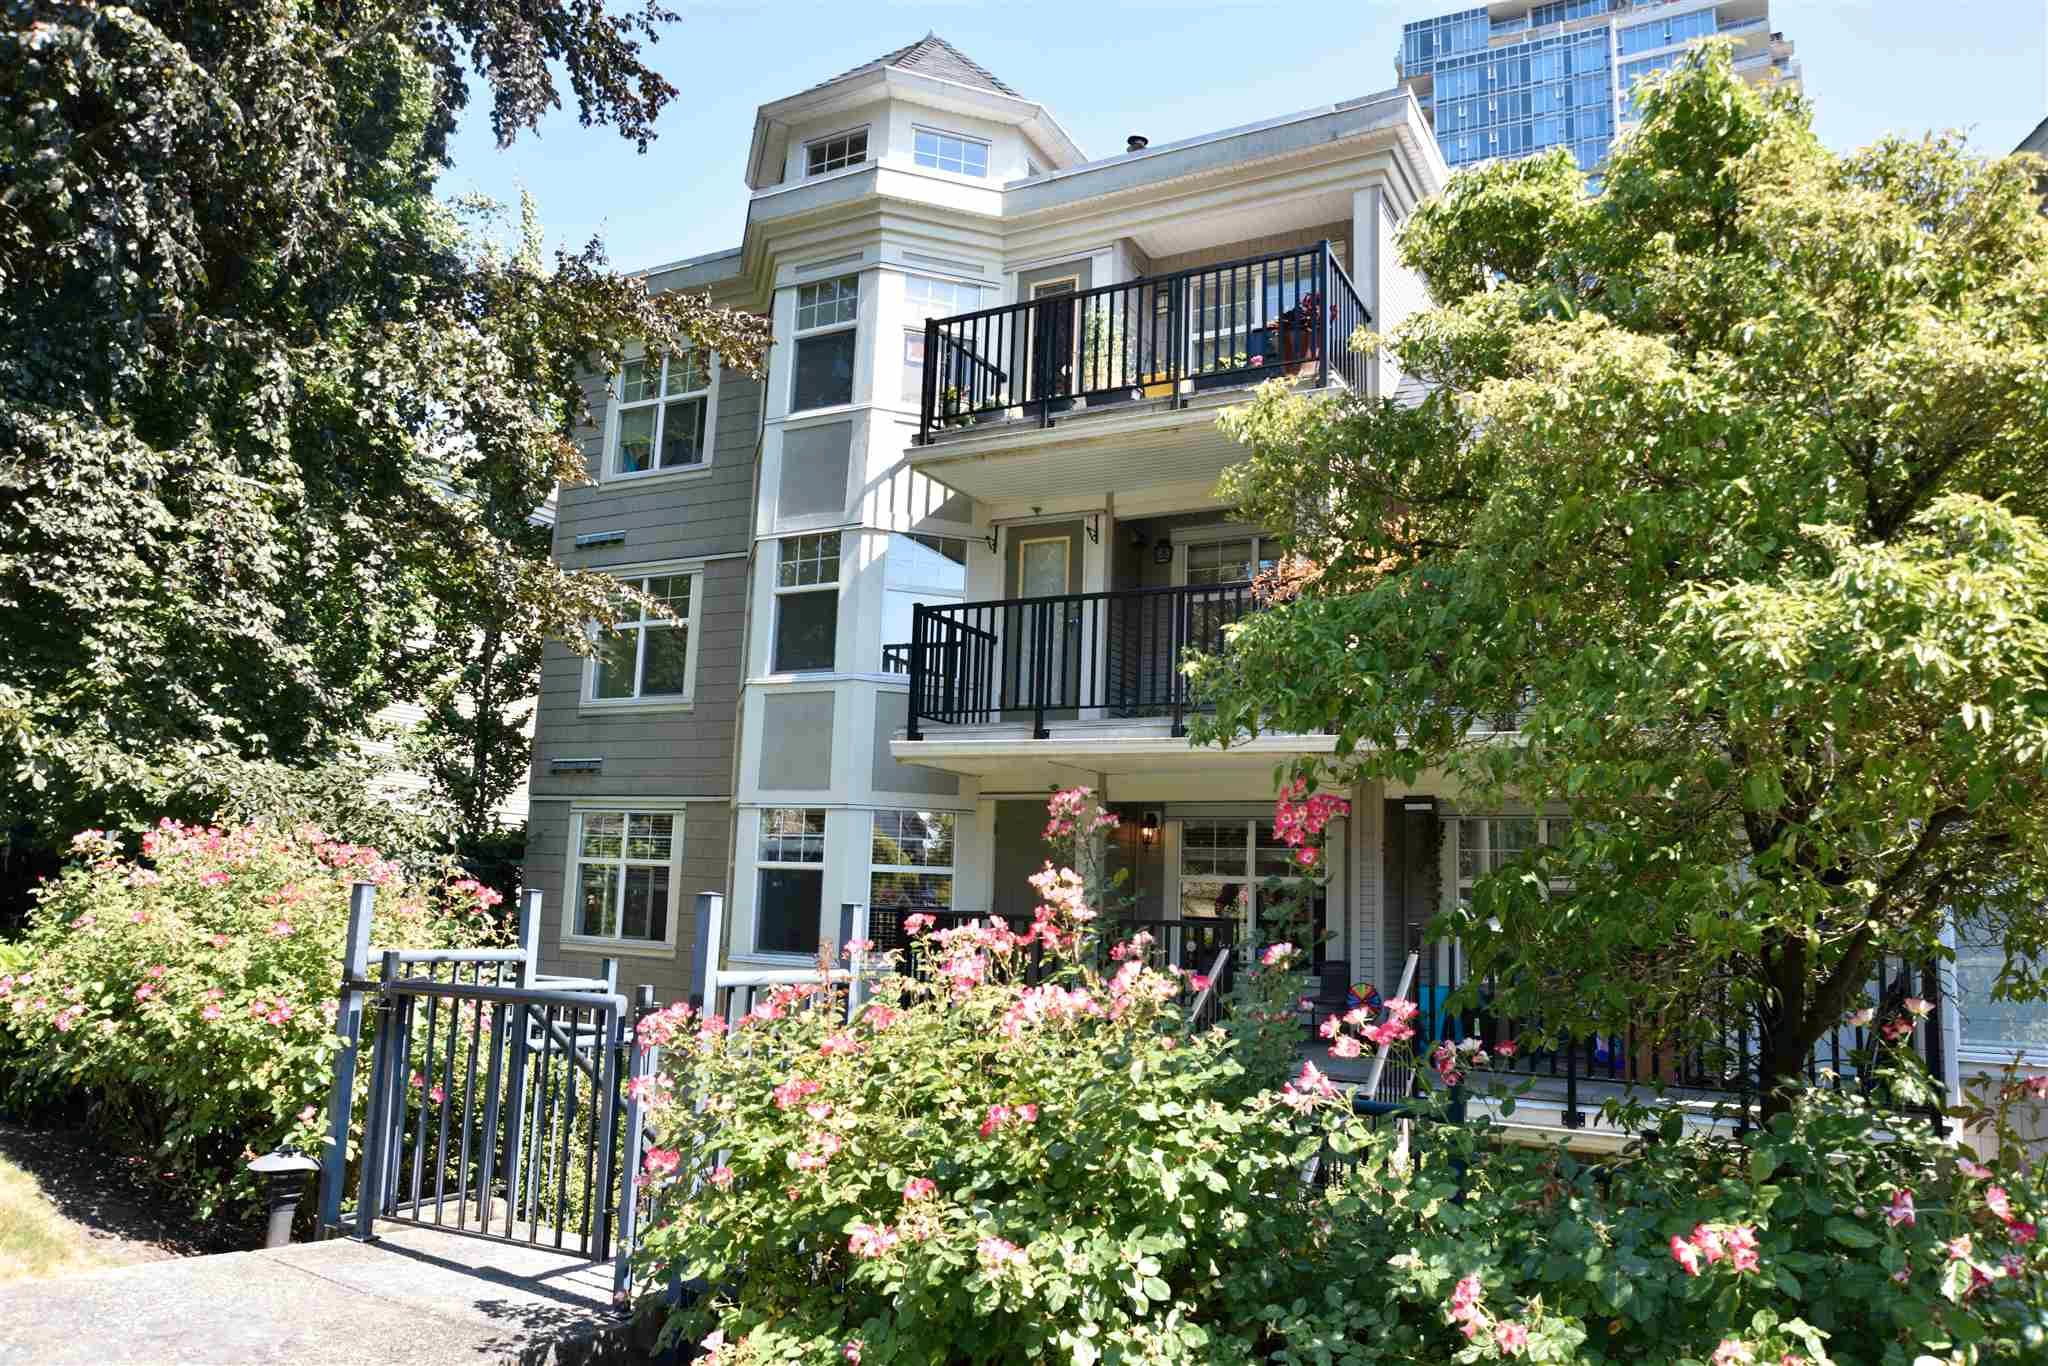 Main Photo: 201 7038 21ST Avenue in Burnaby: Highgate Condo for sale (Burnaby South)  : MLS®# R2598889